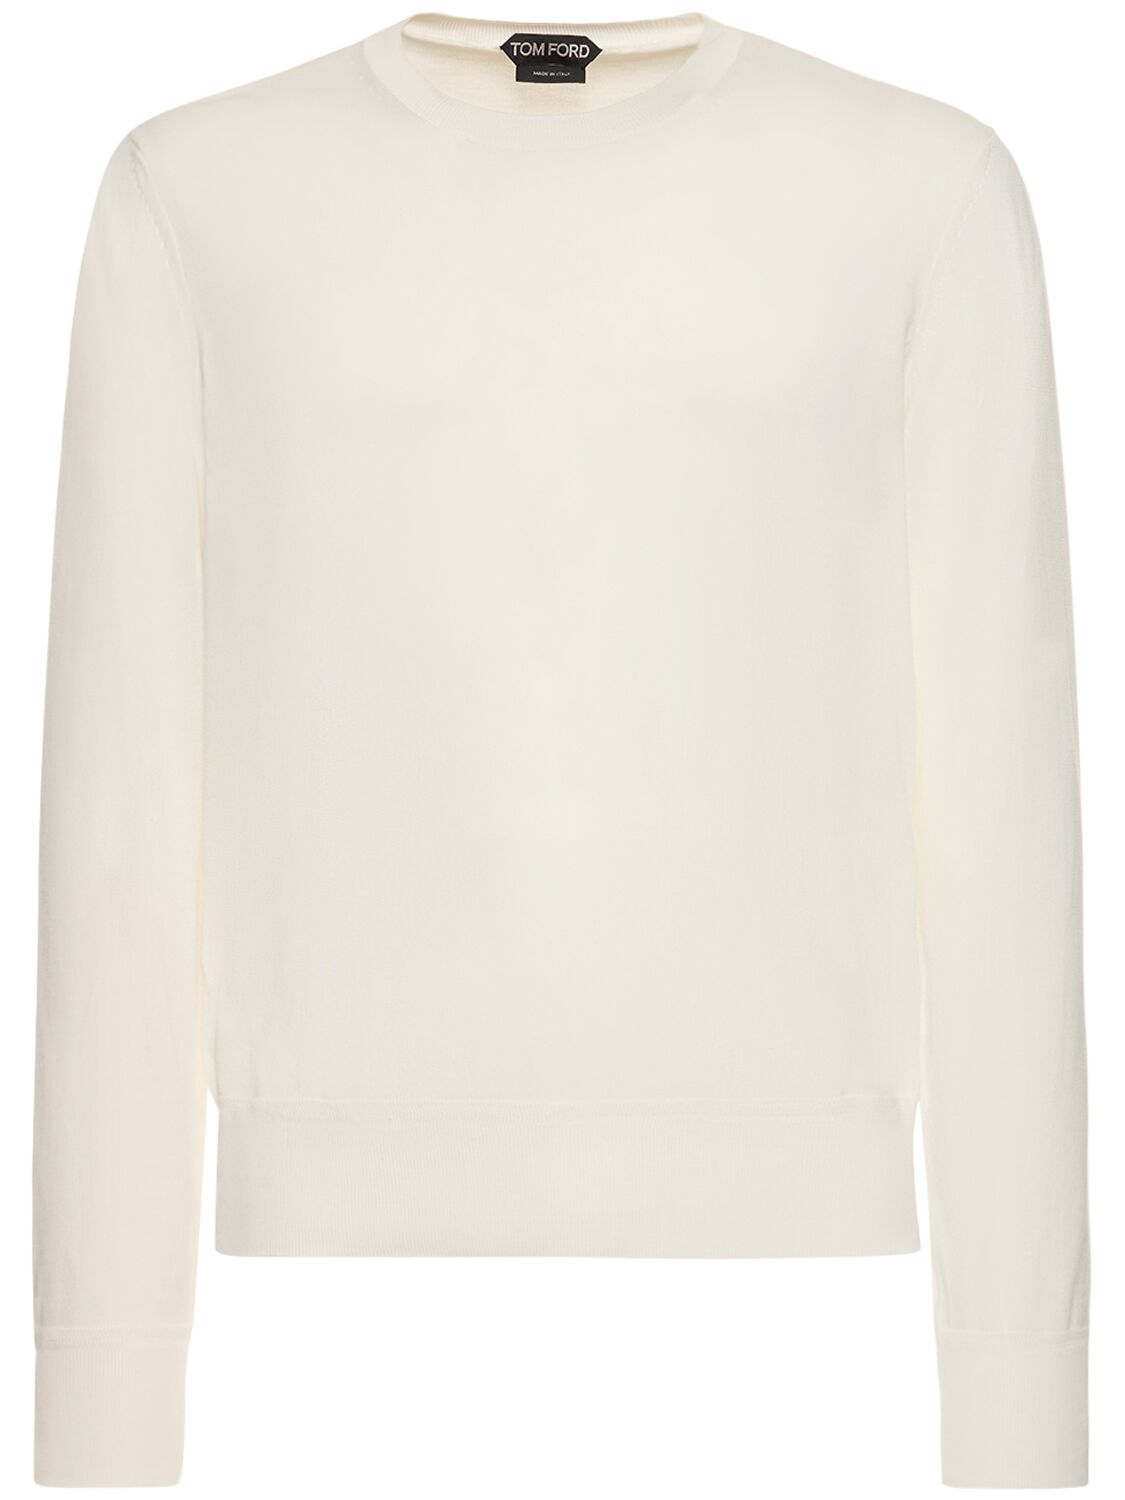 Tom Ford Crewneck Wool Blend Knit Sweater In Ivory